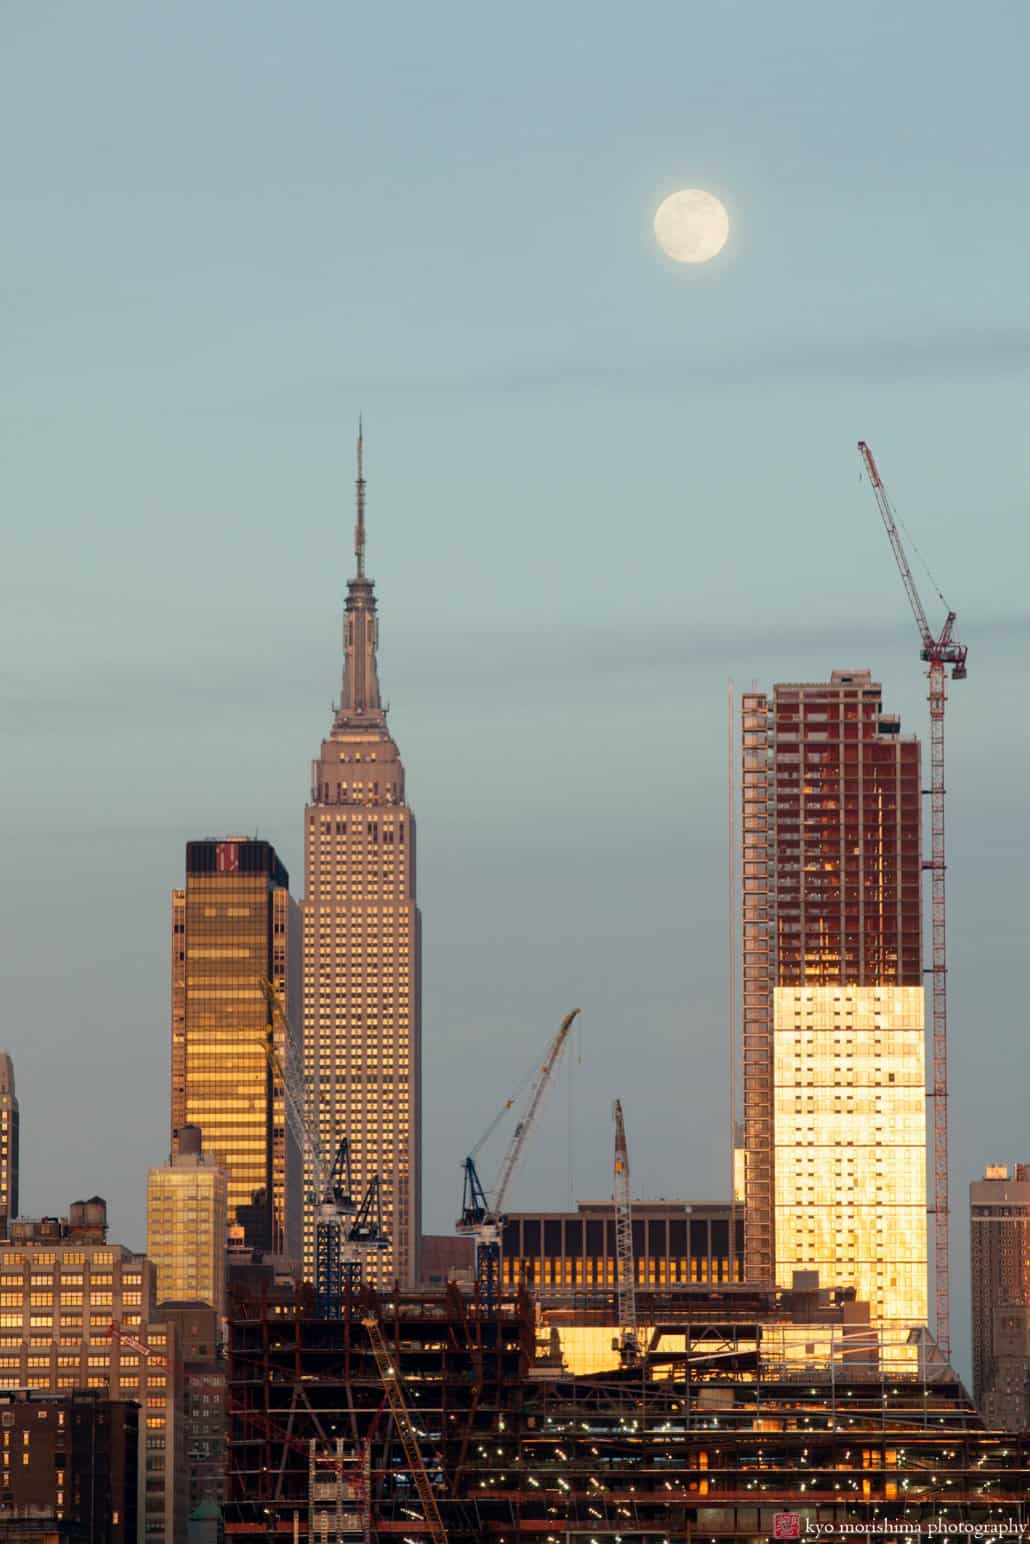 A view of Manhattan construction from Chart House tinged gold by evening sun, photographed by Kyo Morishima